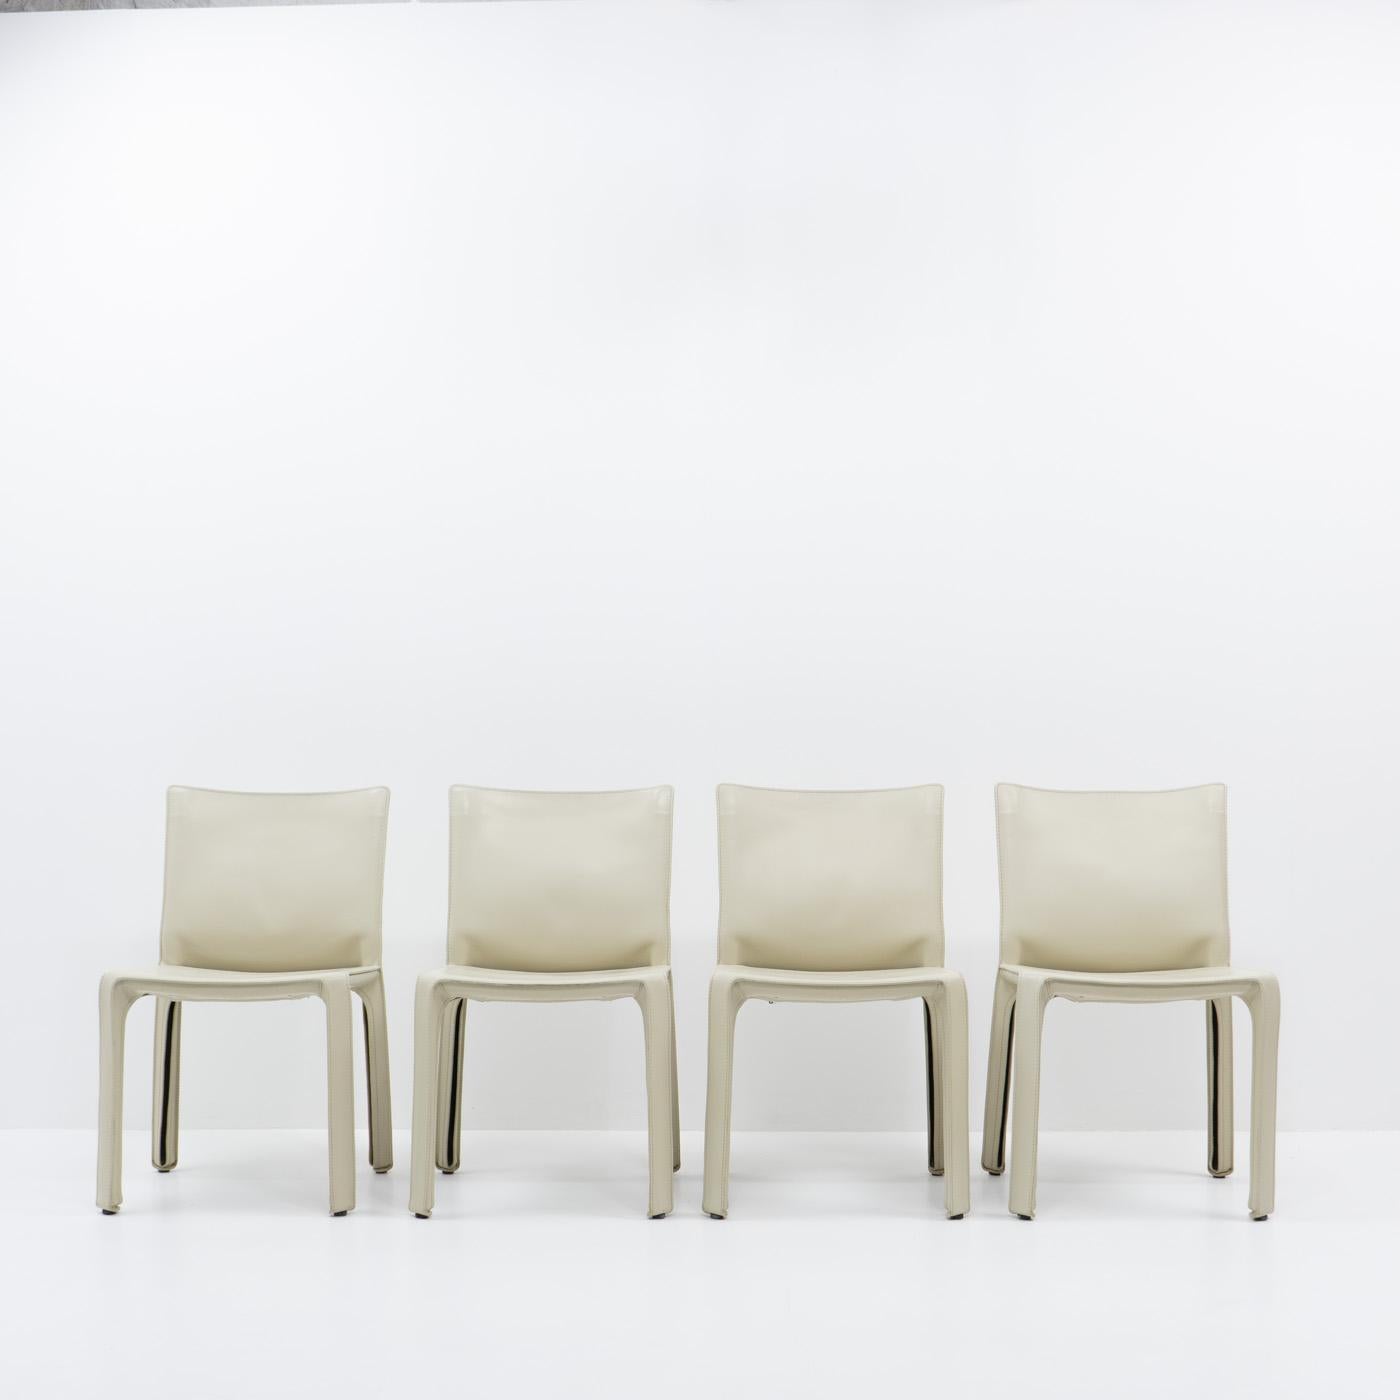 Italian Cab 412 Chairs in Cream Leather by Mario Bellini for Cassina, Set of 4 For Sale